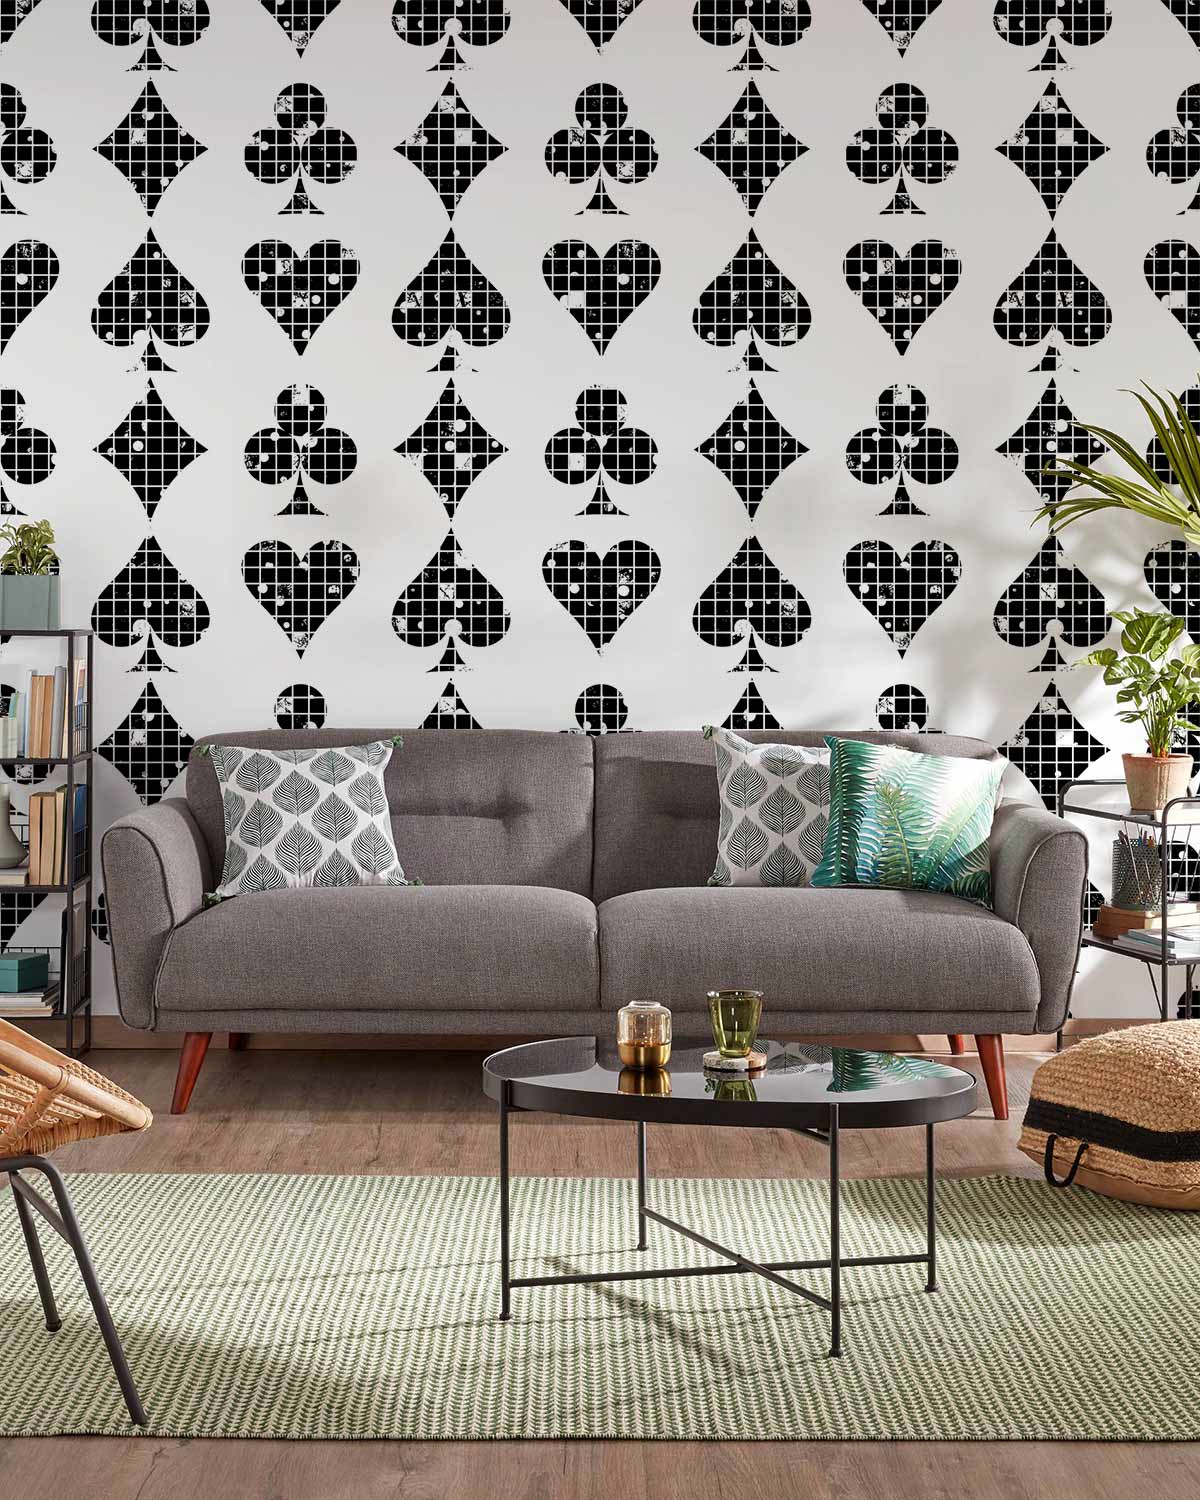 Hearts and plum blossoms adorn the living room, which is painted black.